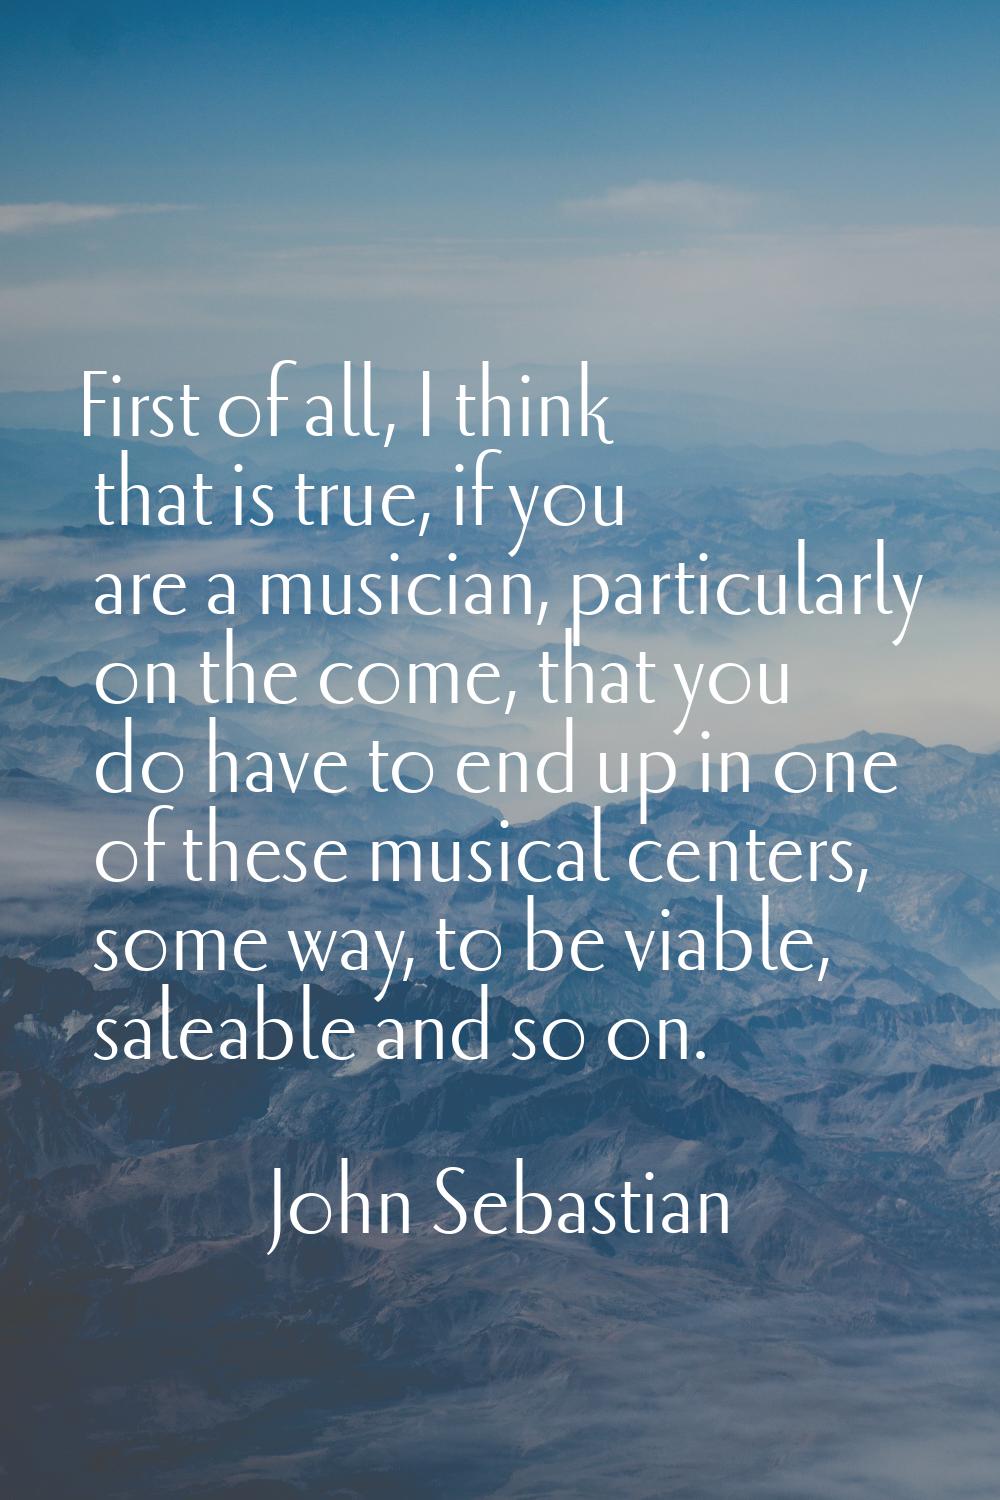 First of all, I think that is true, if you are a musician, particularly on the come, that you do ha